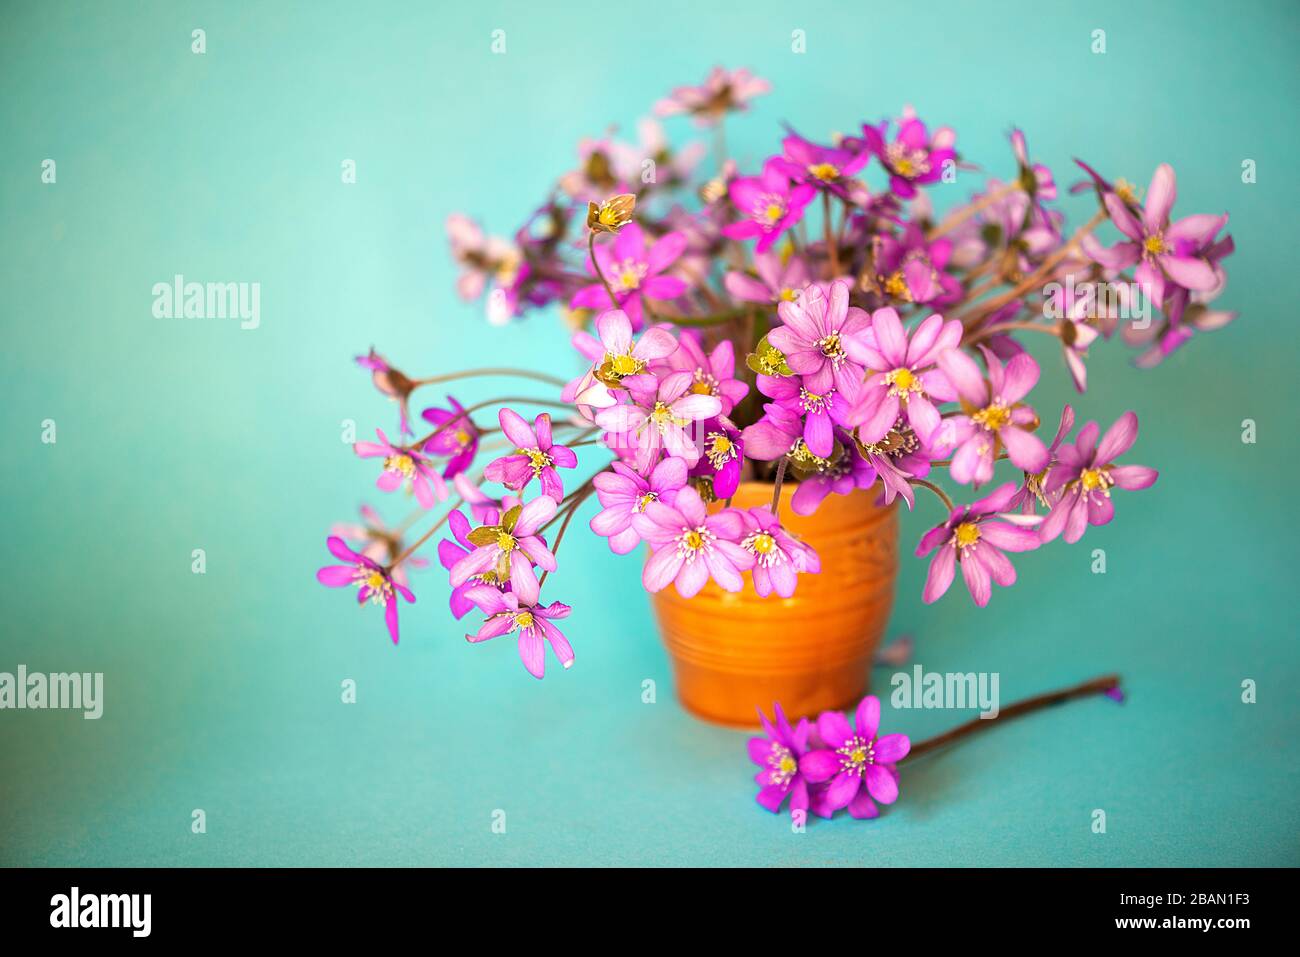 Hepatica purple flowers with fallen petals in a small glass vase on green background. Stock Photo